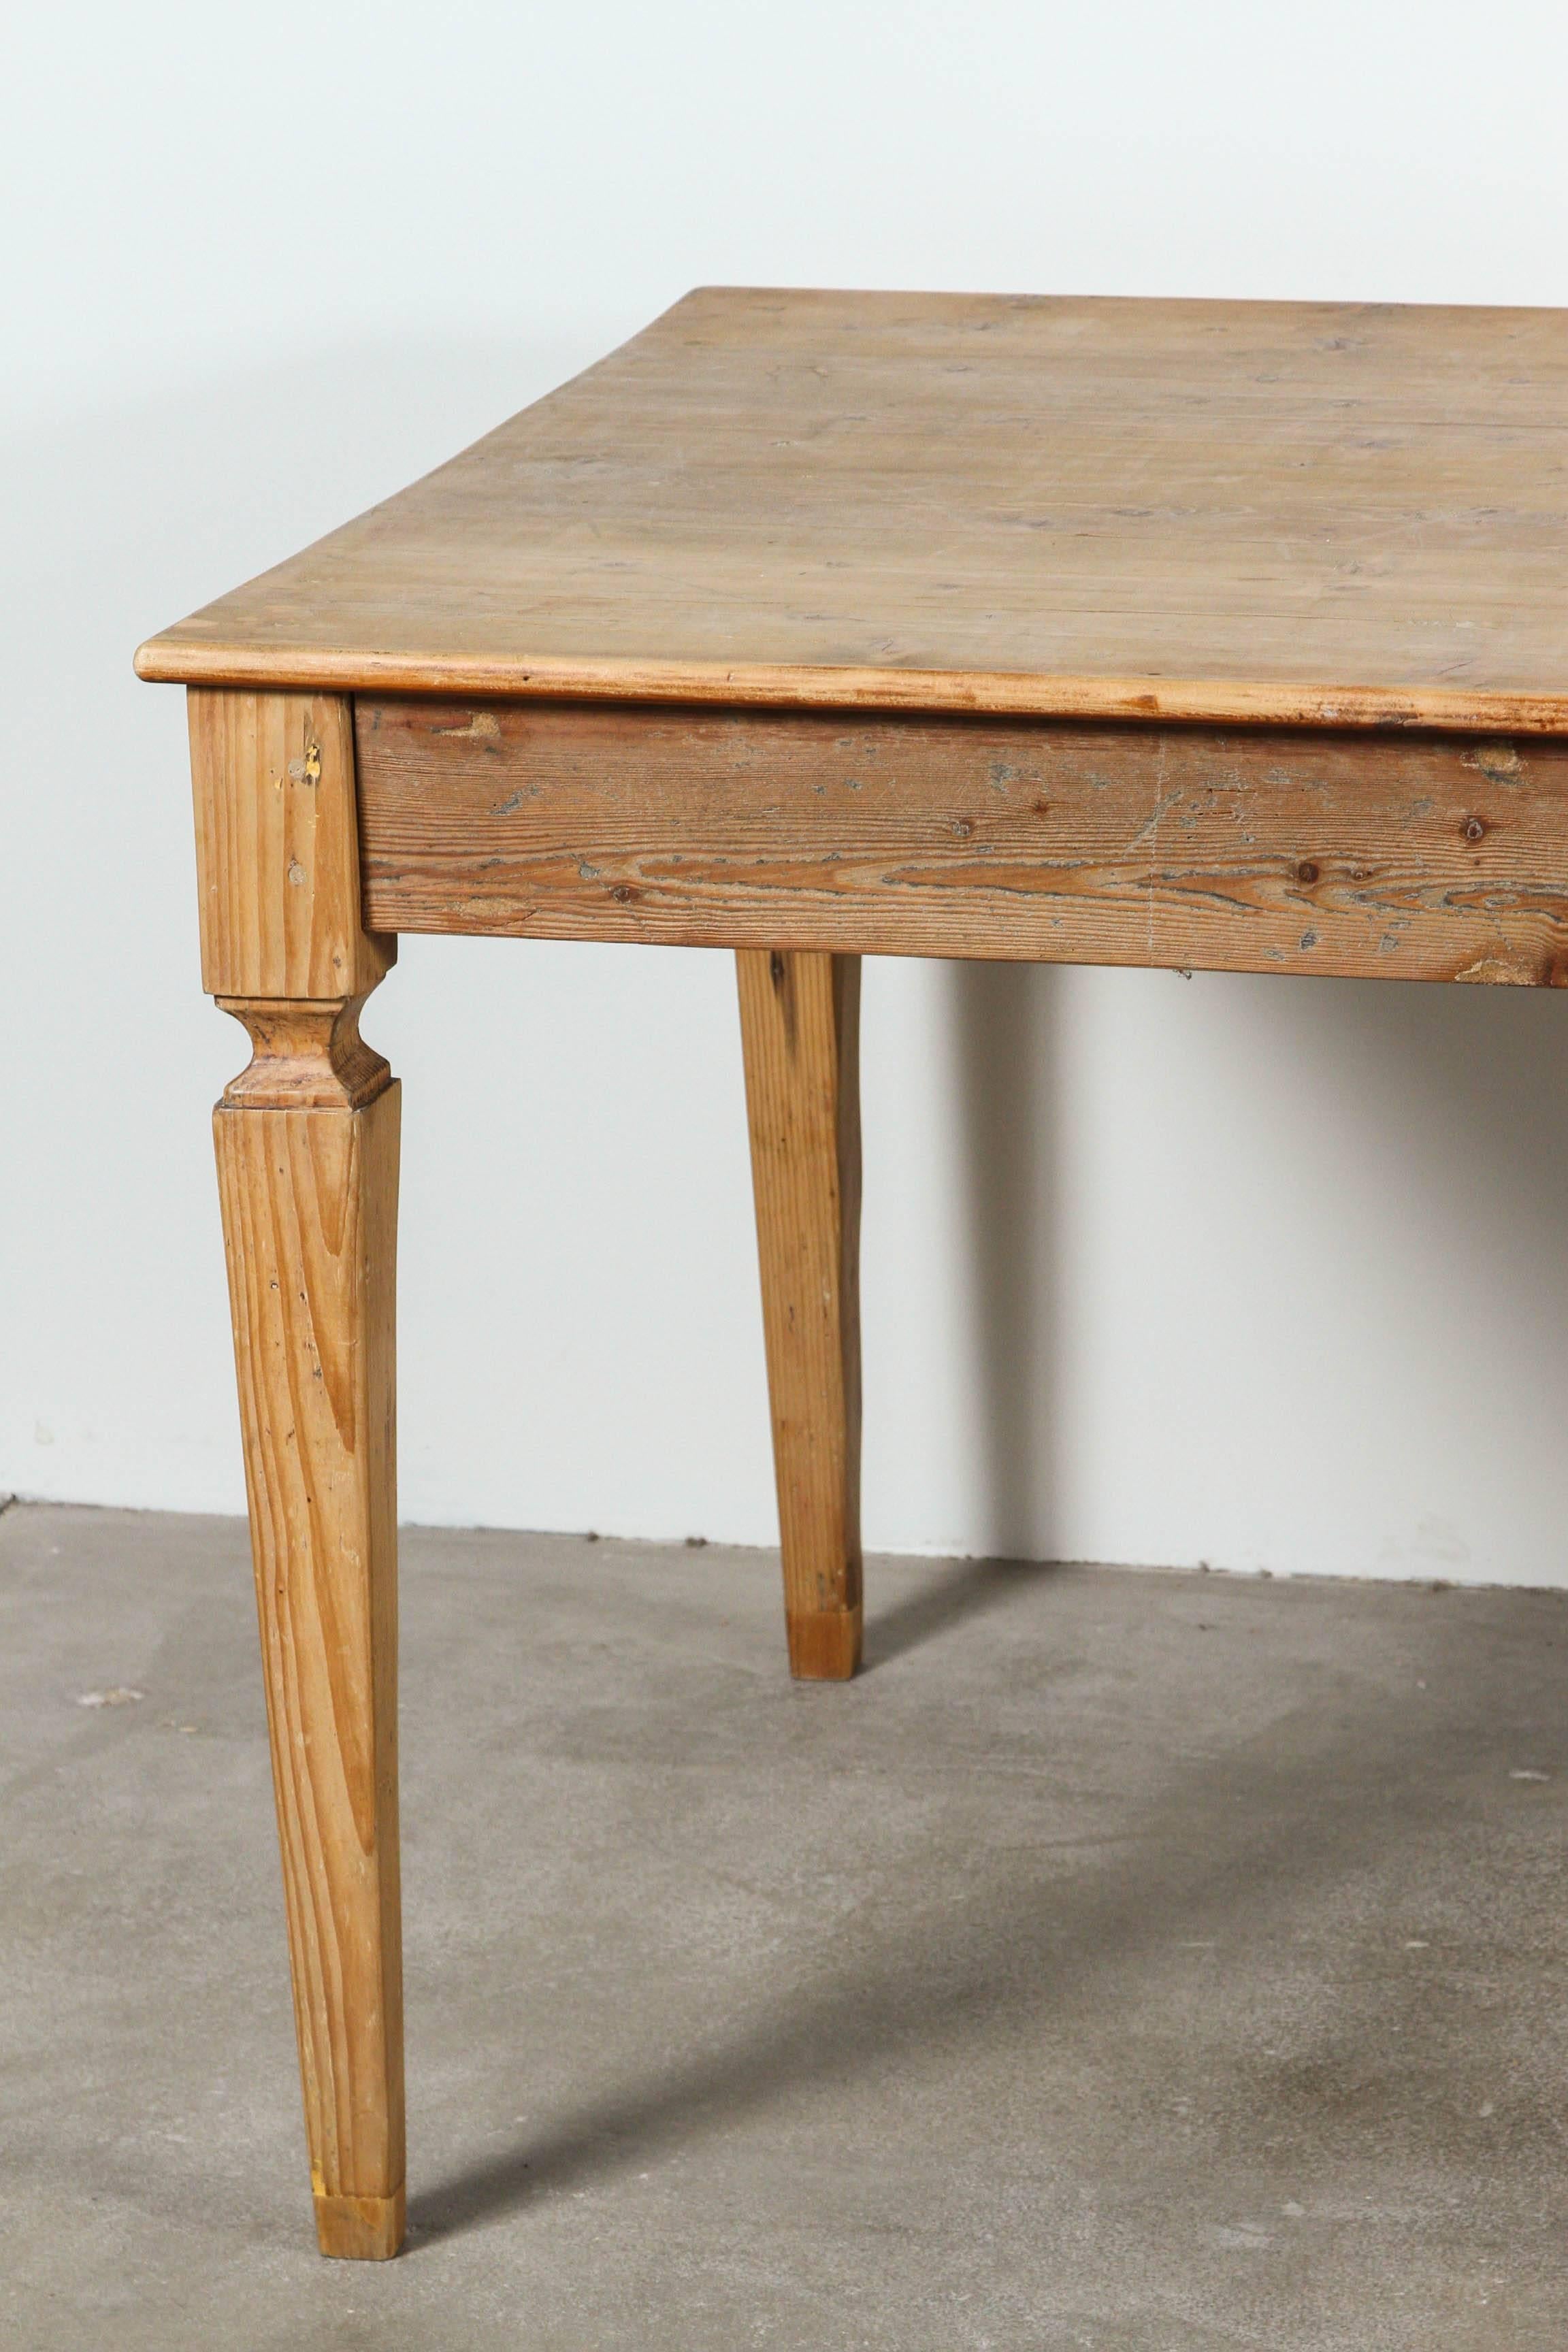 Rustic Italian pine farm table with obelisk tapered legs and a single pull-out drawer.